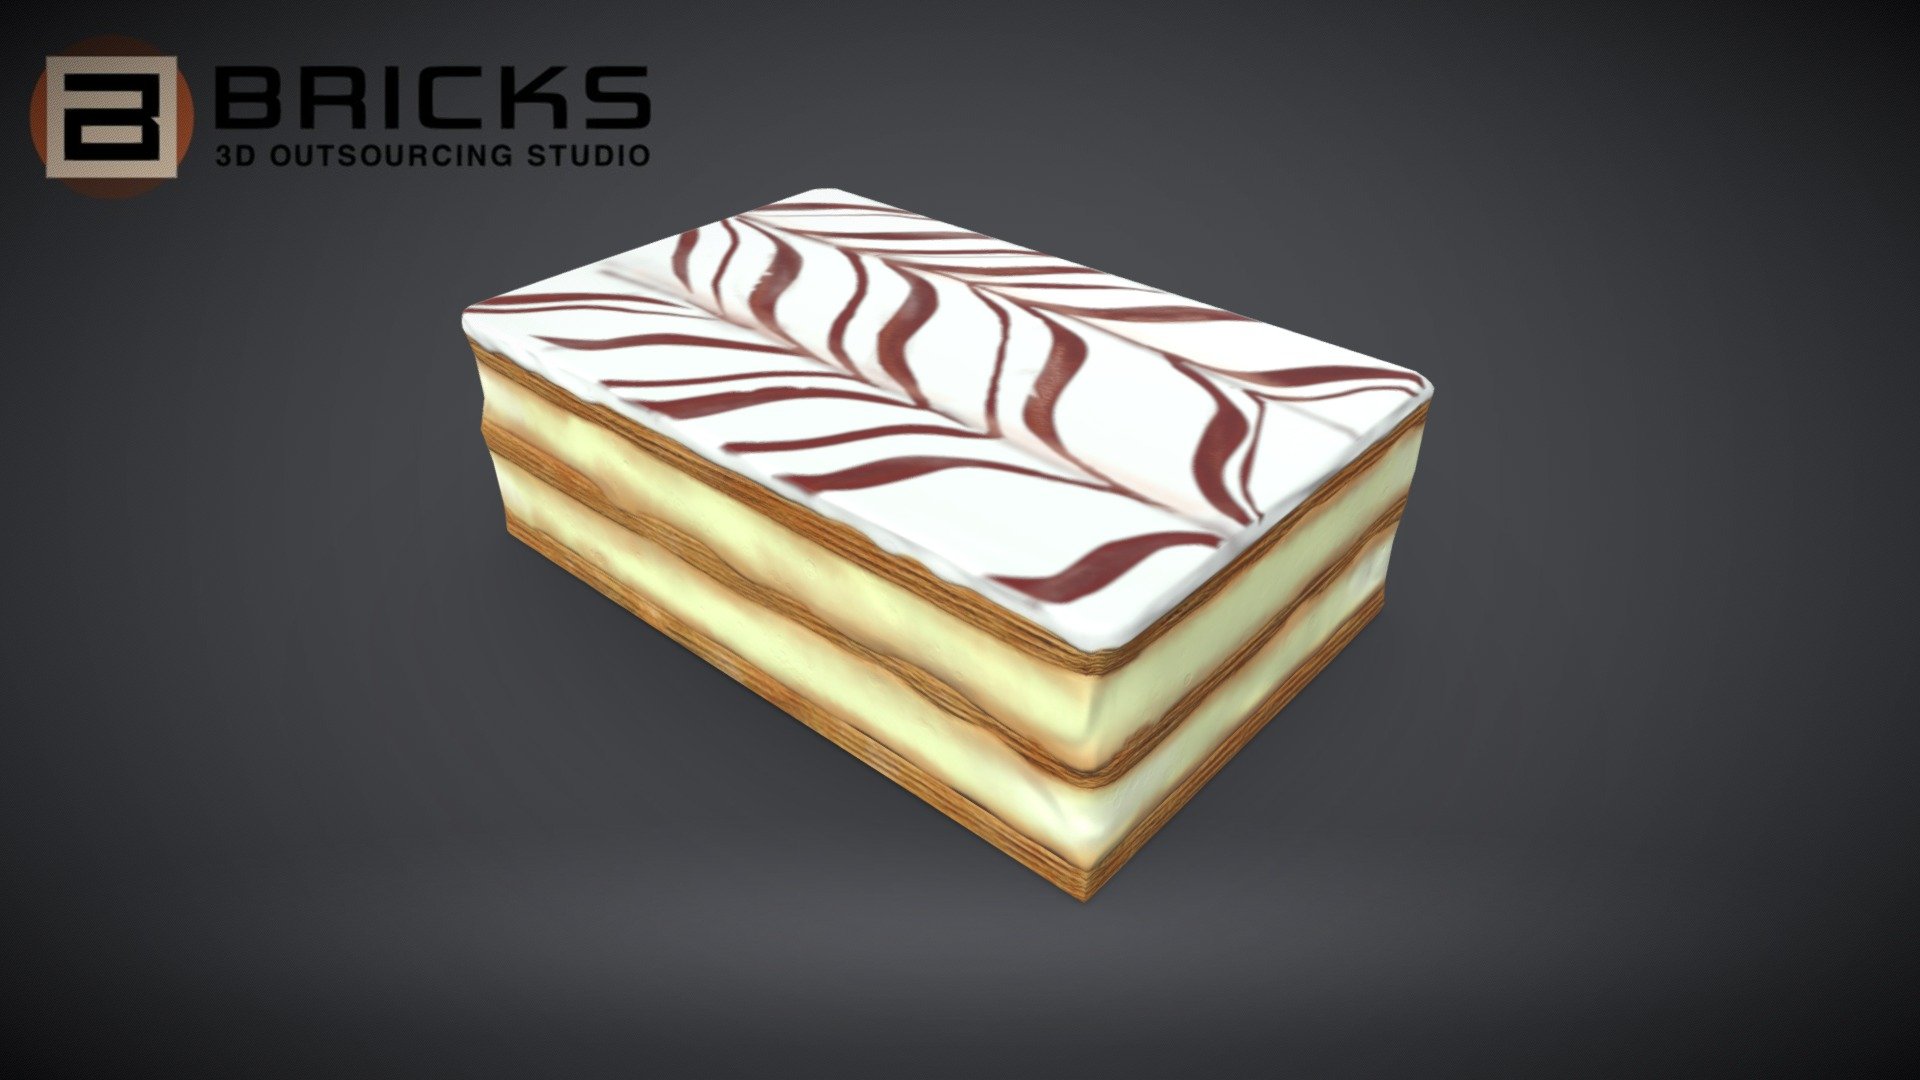 PBR Food Asset:
Millefeuille
Polycount: 956
Vertex count: 480
Texture Size: 2048px x 2048px
Normal: OpenGL

If you need any adjust in file please contact us: team@bricks3dstudio.com

Hire us: tringuyen@bricks3dstudio.com
Here is us: https://www.bricks3dstudio.com/
        https://www.artstation.com/bricksstudio
        https://www.facebook.com/Bricks3dstudio/
        https://www.linkedin.com/in/bricks-studio-b10462252/ - Millefeuille - Buy Royalty Free 3D model by Bricks Studio (@bricks3dstudio) 3d model